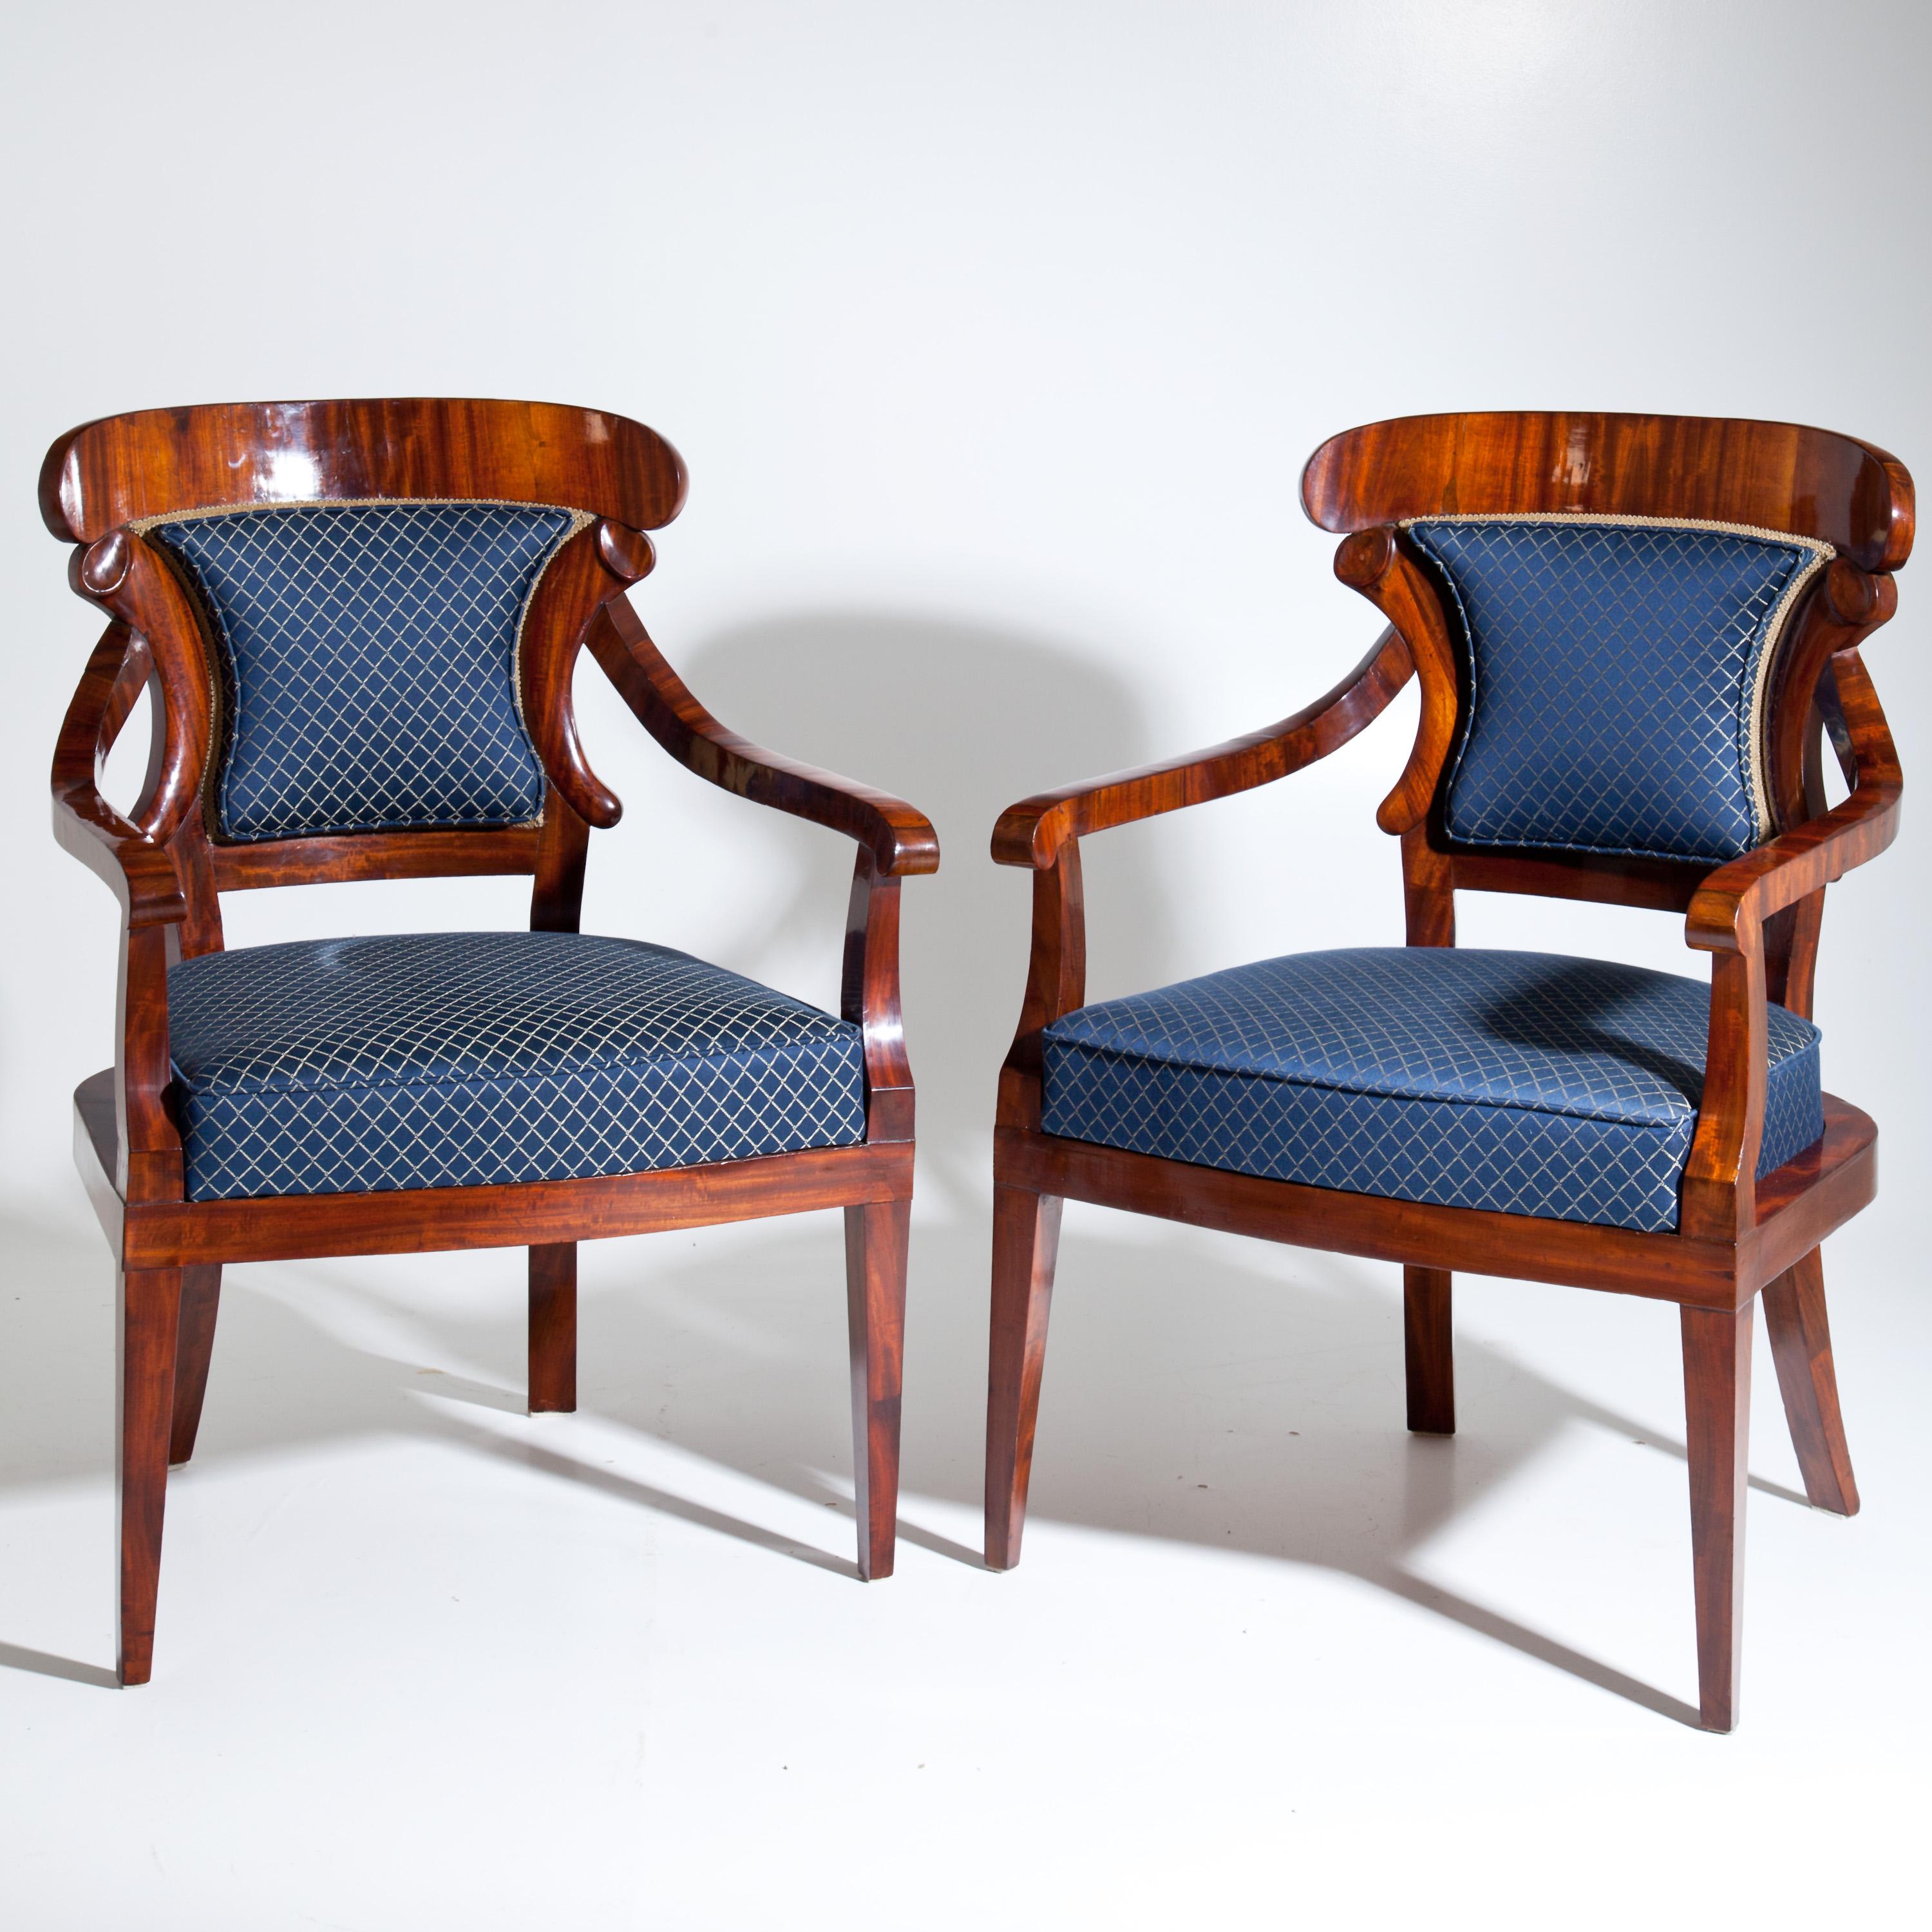 Pair of Biedermeier mahogany armchairs with curved armrests and shovel-shaped backrests. The vertical struts of the backrests are modelled on stylised cornucopias. The seats and backrests are newly covered with a blue satin fabric with a gold